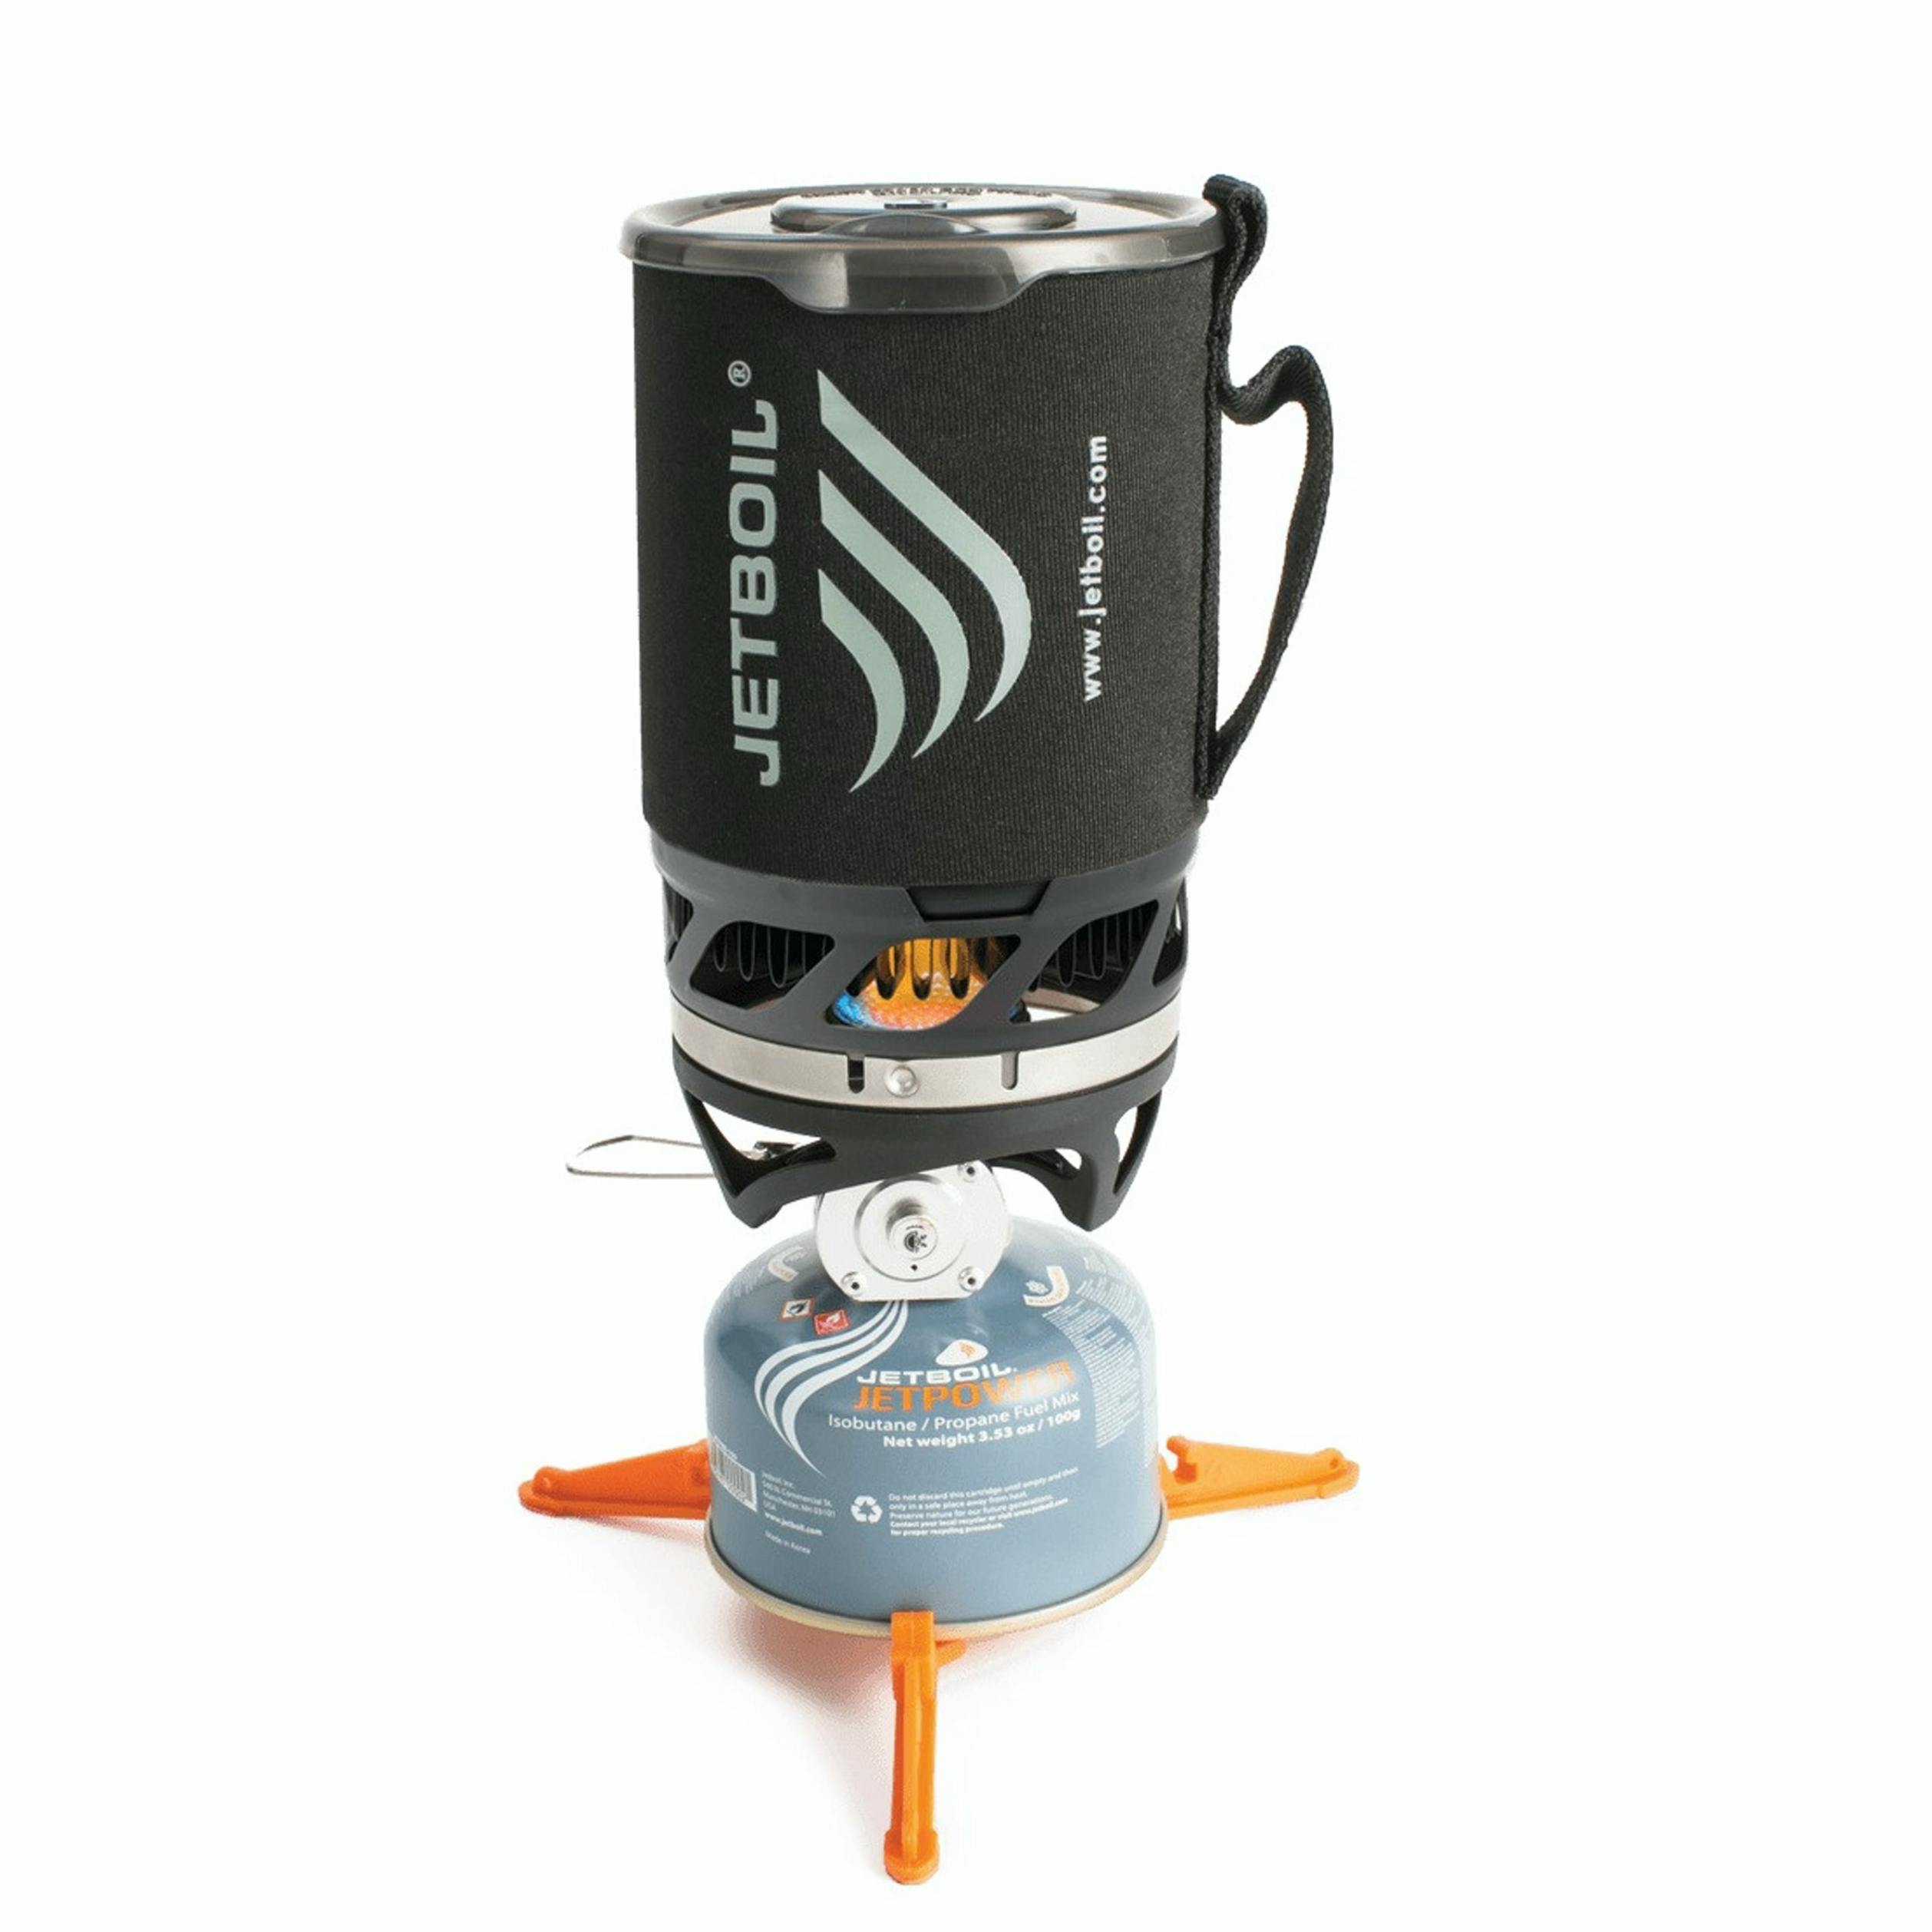 Product image of the Jetboil MicroMo Stove.